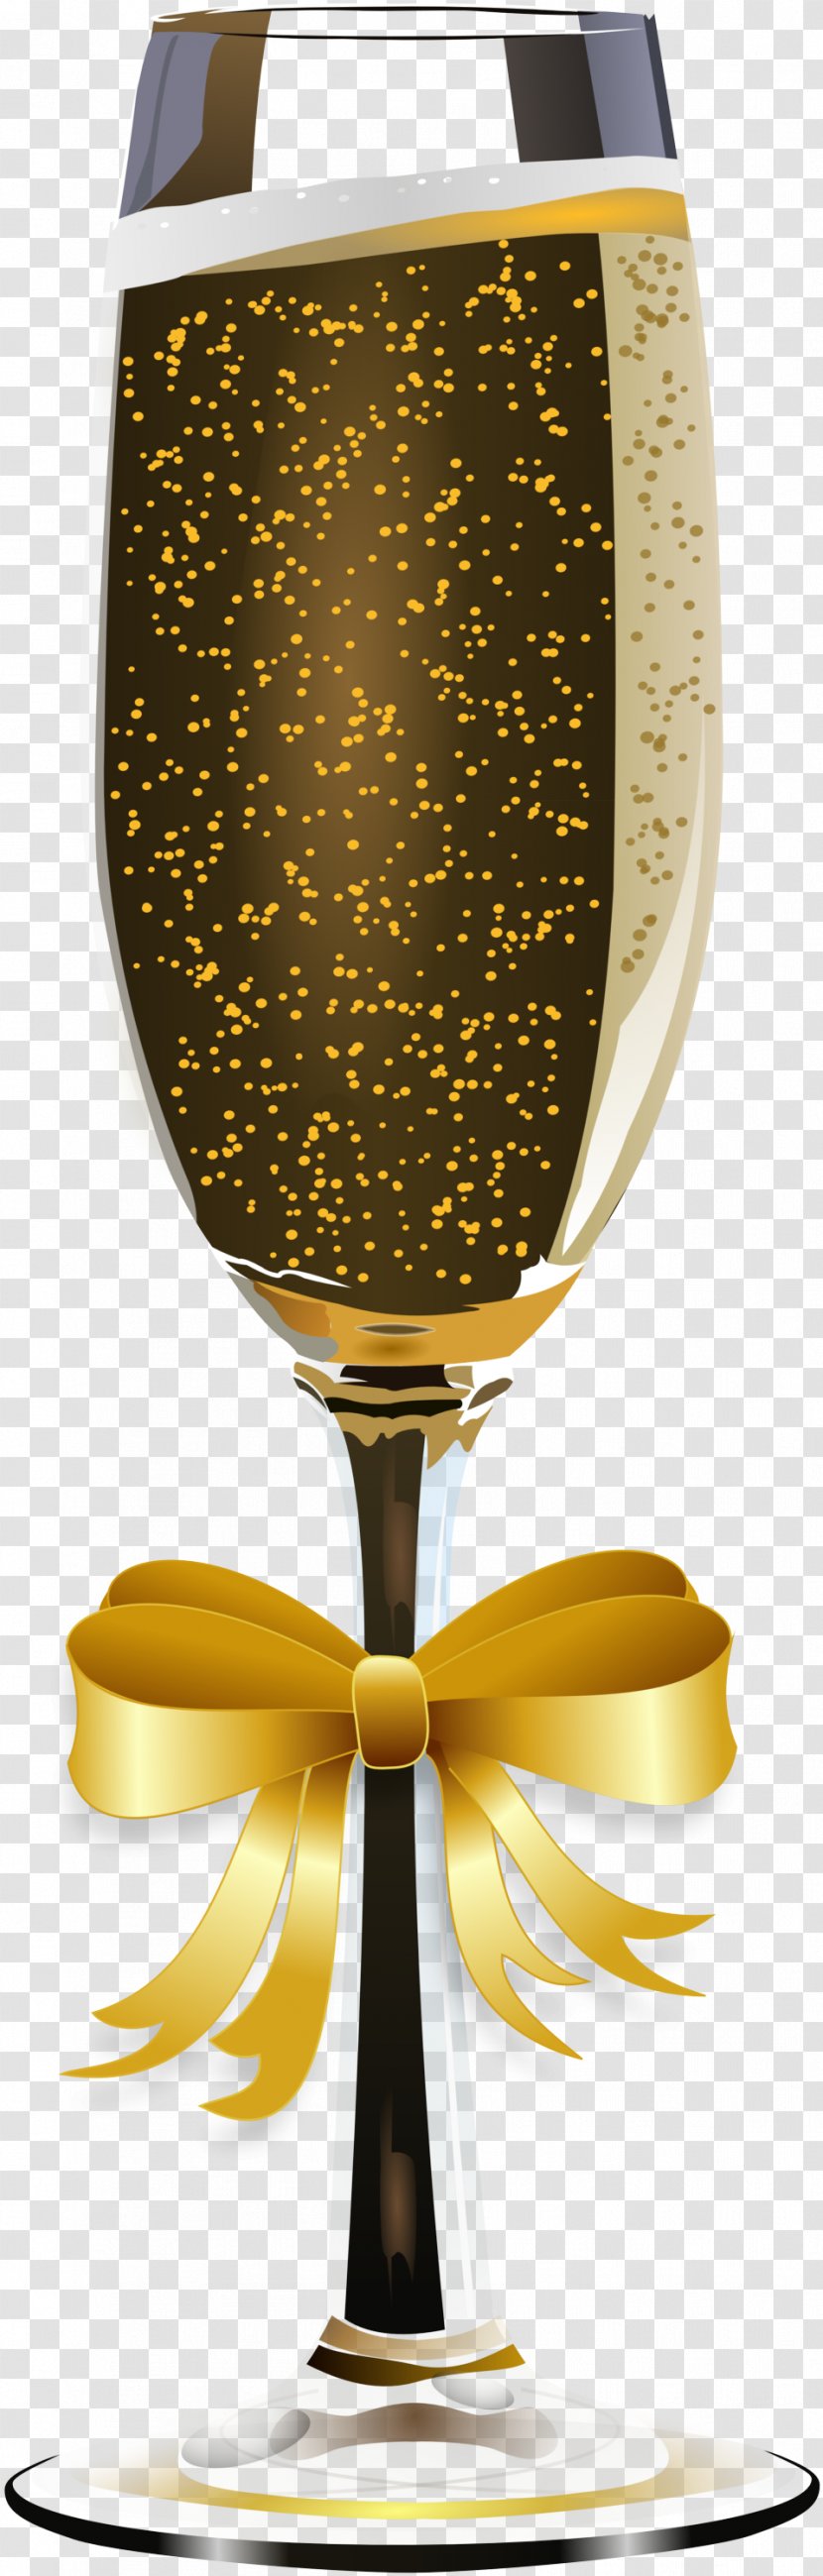 Wine Glass - Champagne Cocktail - Drink Chalice Transparent PNG